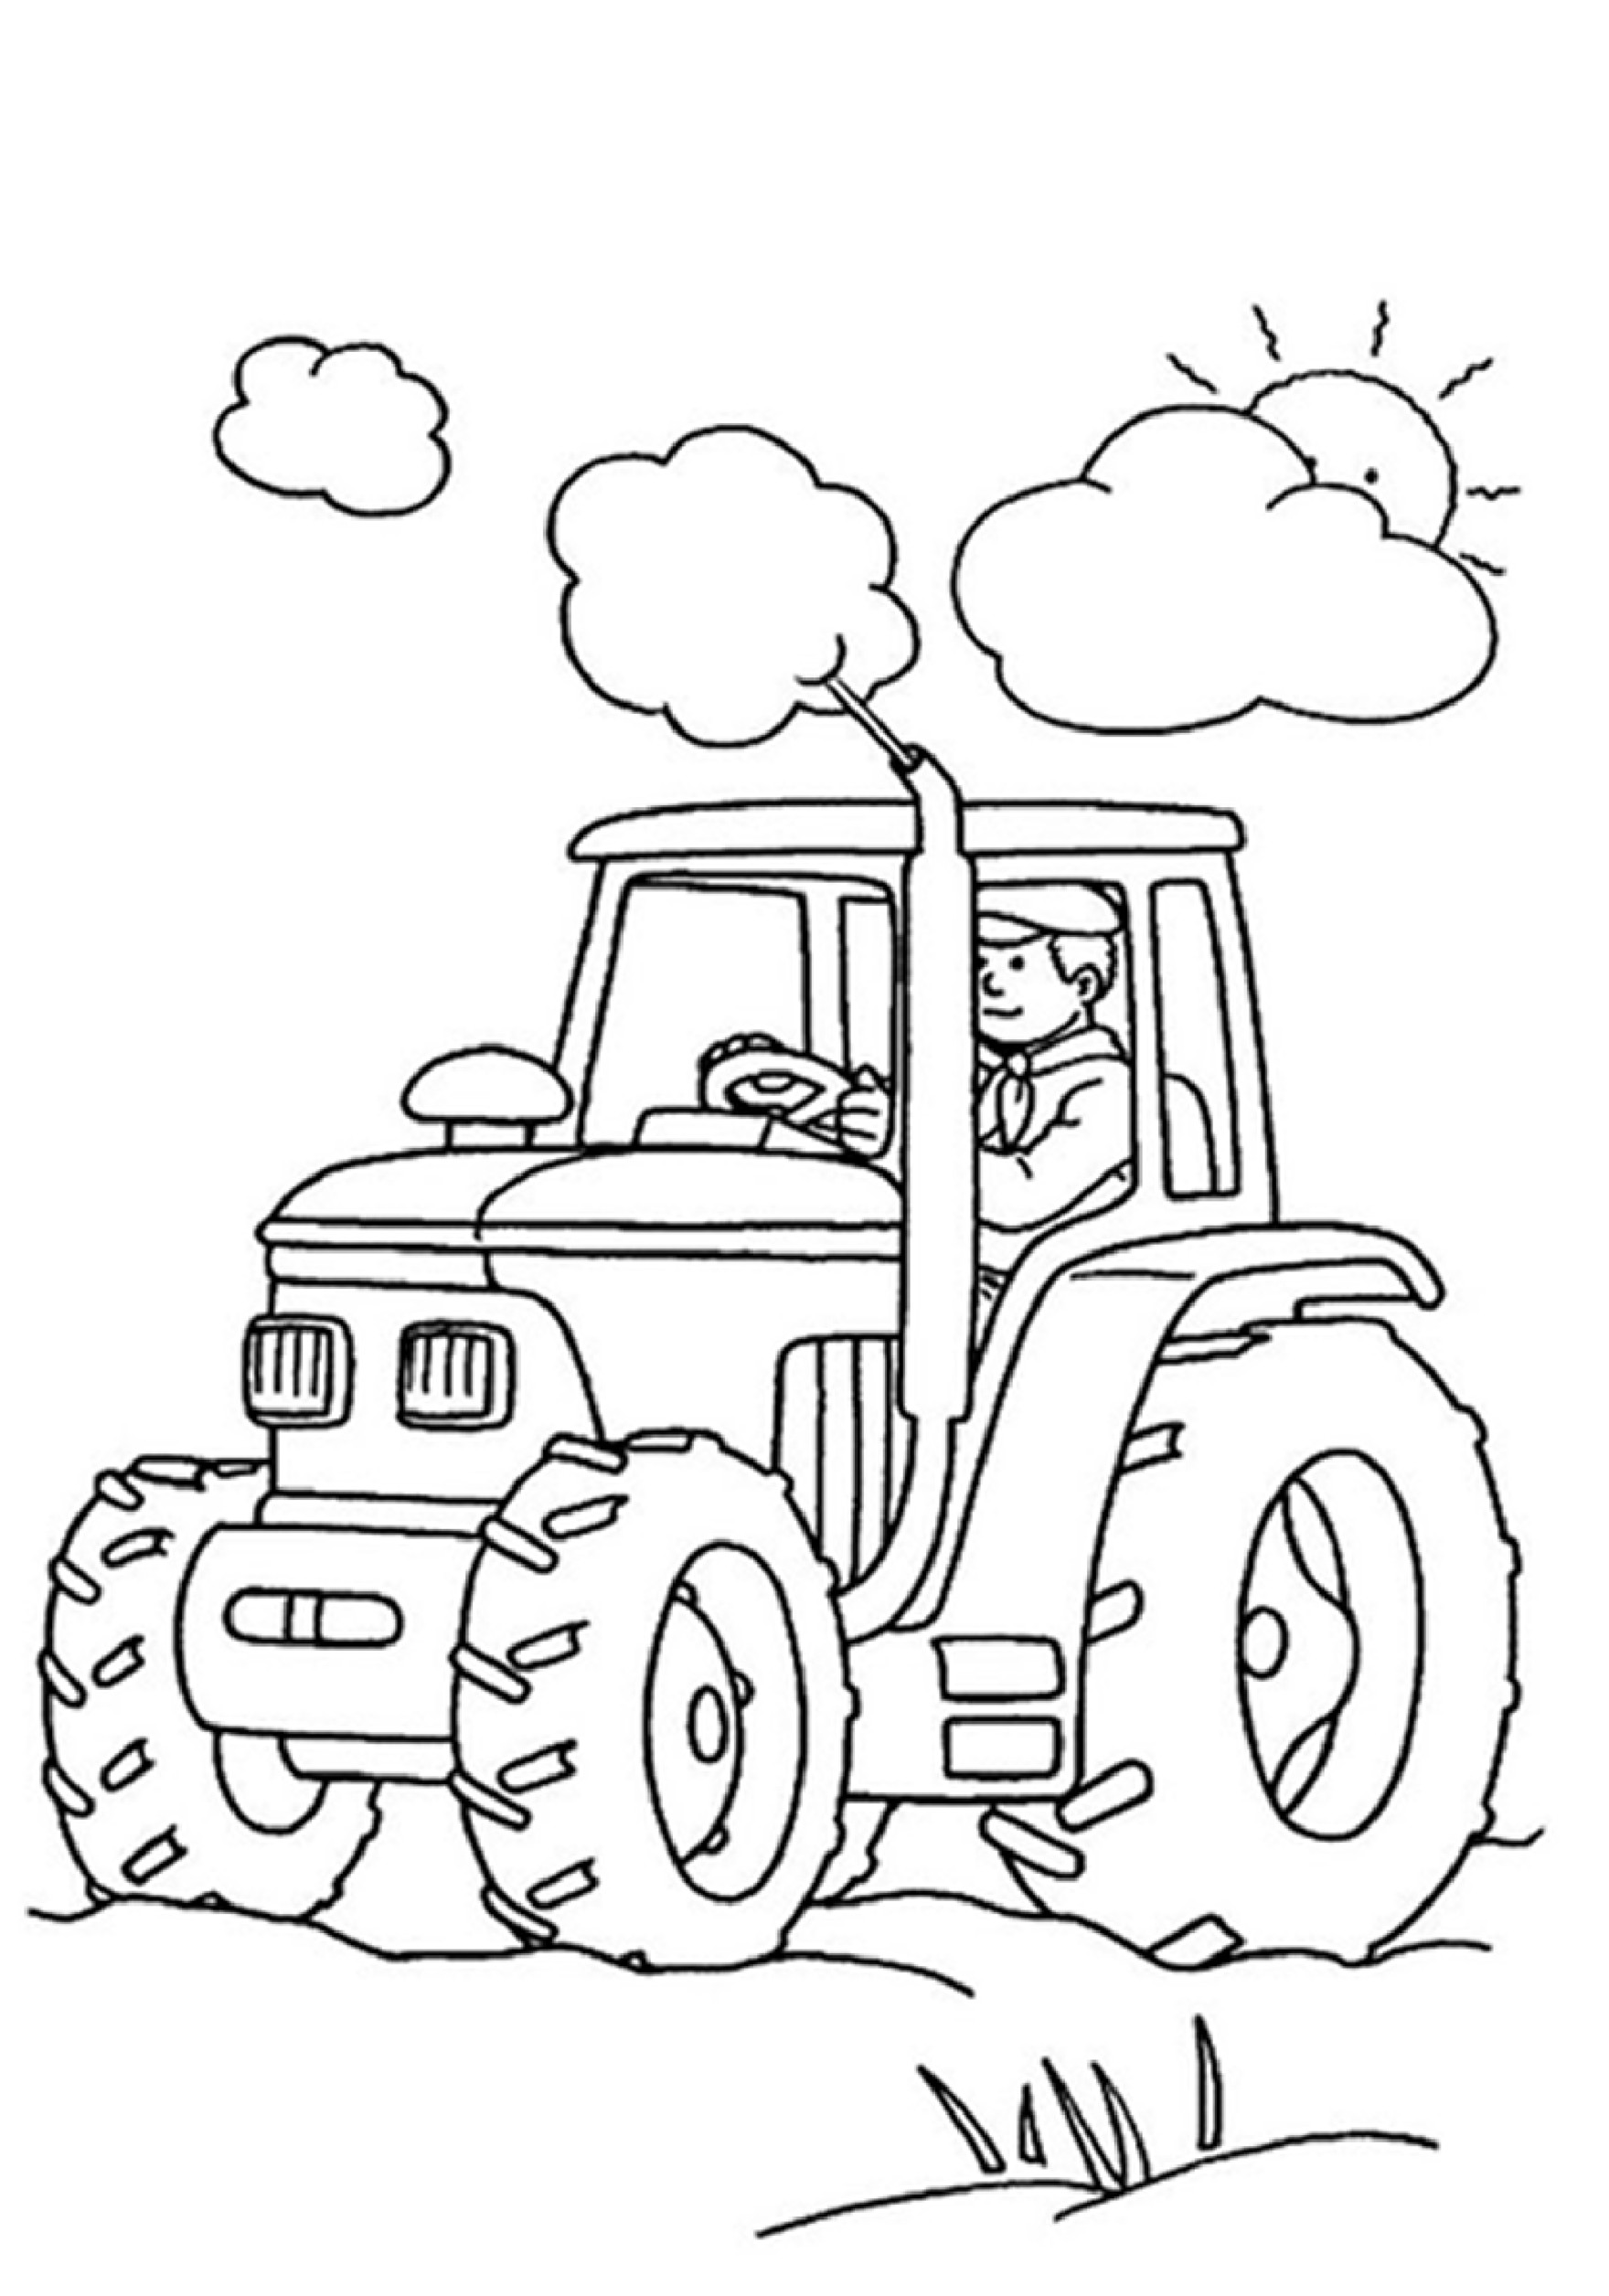 Coloring Sheets For Boys Online
 Free printable coloring pages for kids